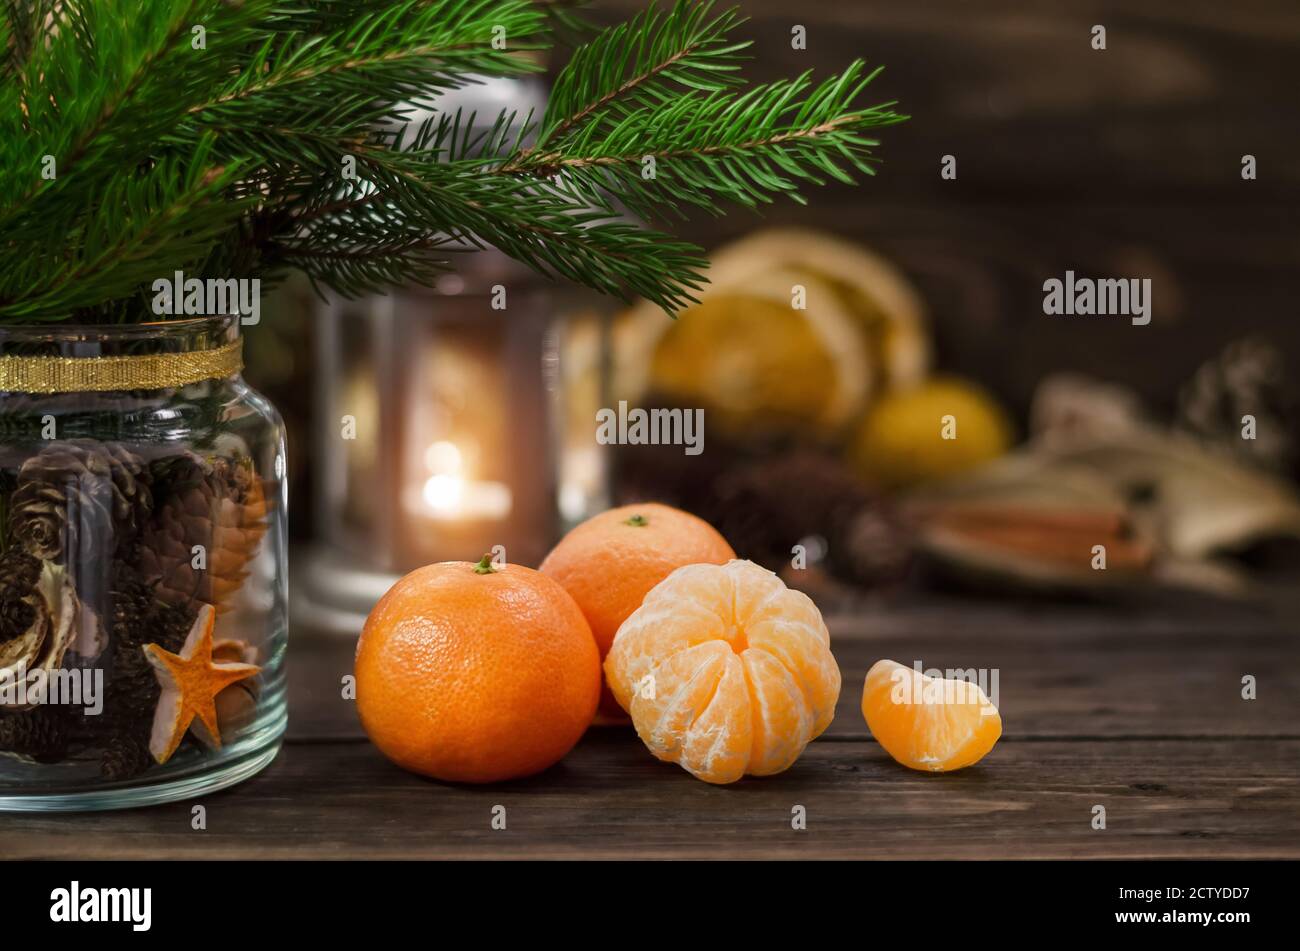 Ripe juicy mandarins, fir twigs and a glass jar with cones close-up on a wooden rustic table. Christmas or New Year holiday concept. Stock Photo